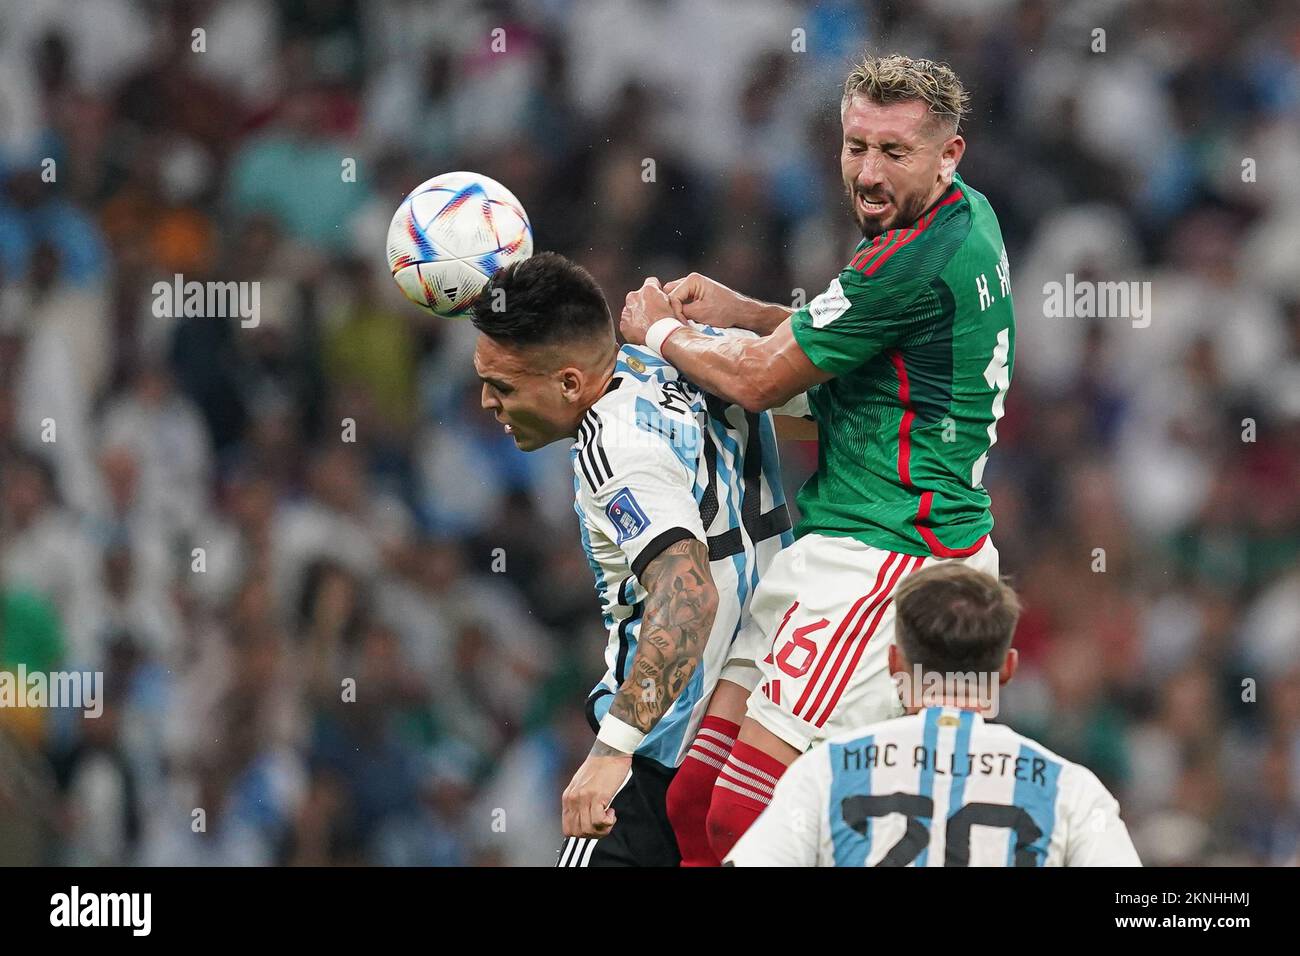 LUSAIL, QATAR - NOVEMBER 26: Player of Argentina Lautaro Martínez fights for the ball with player of Mexico Héctor Herrera during the FIFA World Cup Qatar 2022 group C match between Argentina and Mexico at Lusail Stadium on November 26, 2022 in Lusail, Qatar. (Photo by Florencia Tan Jun/PxImages) Stock Photo